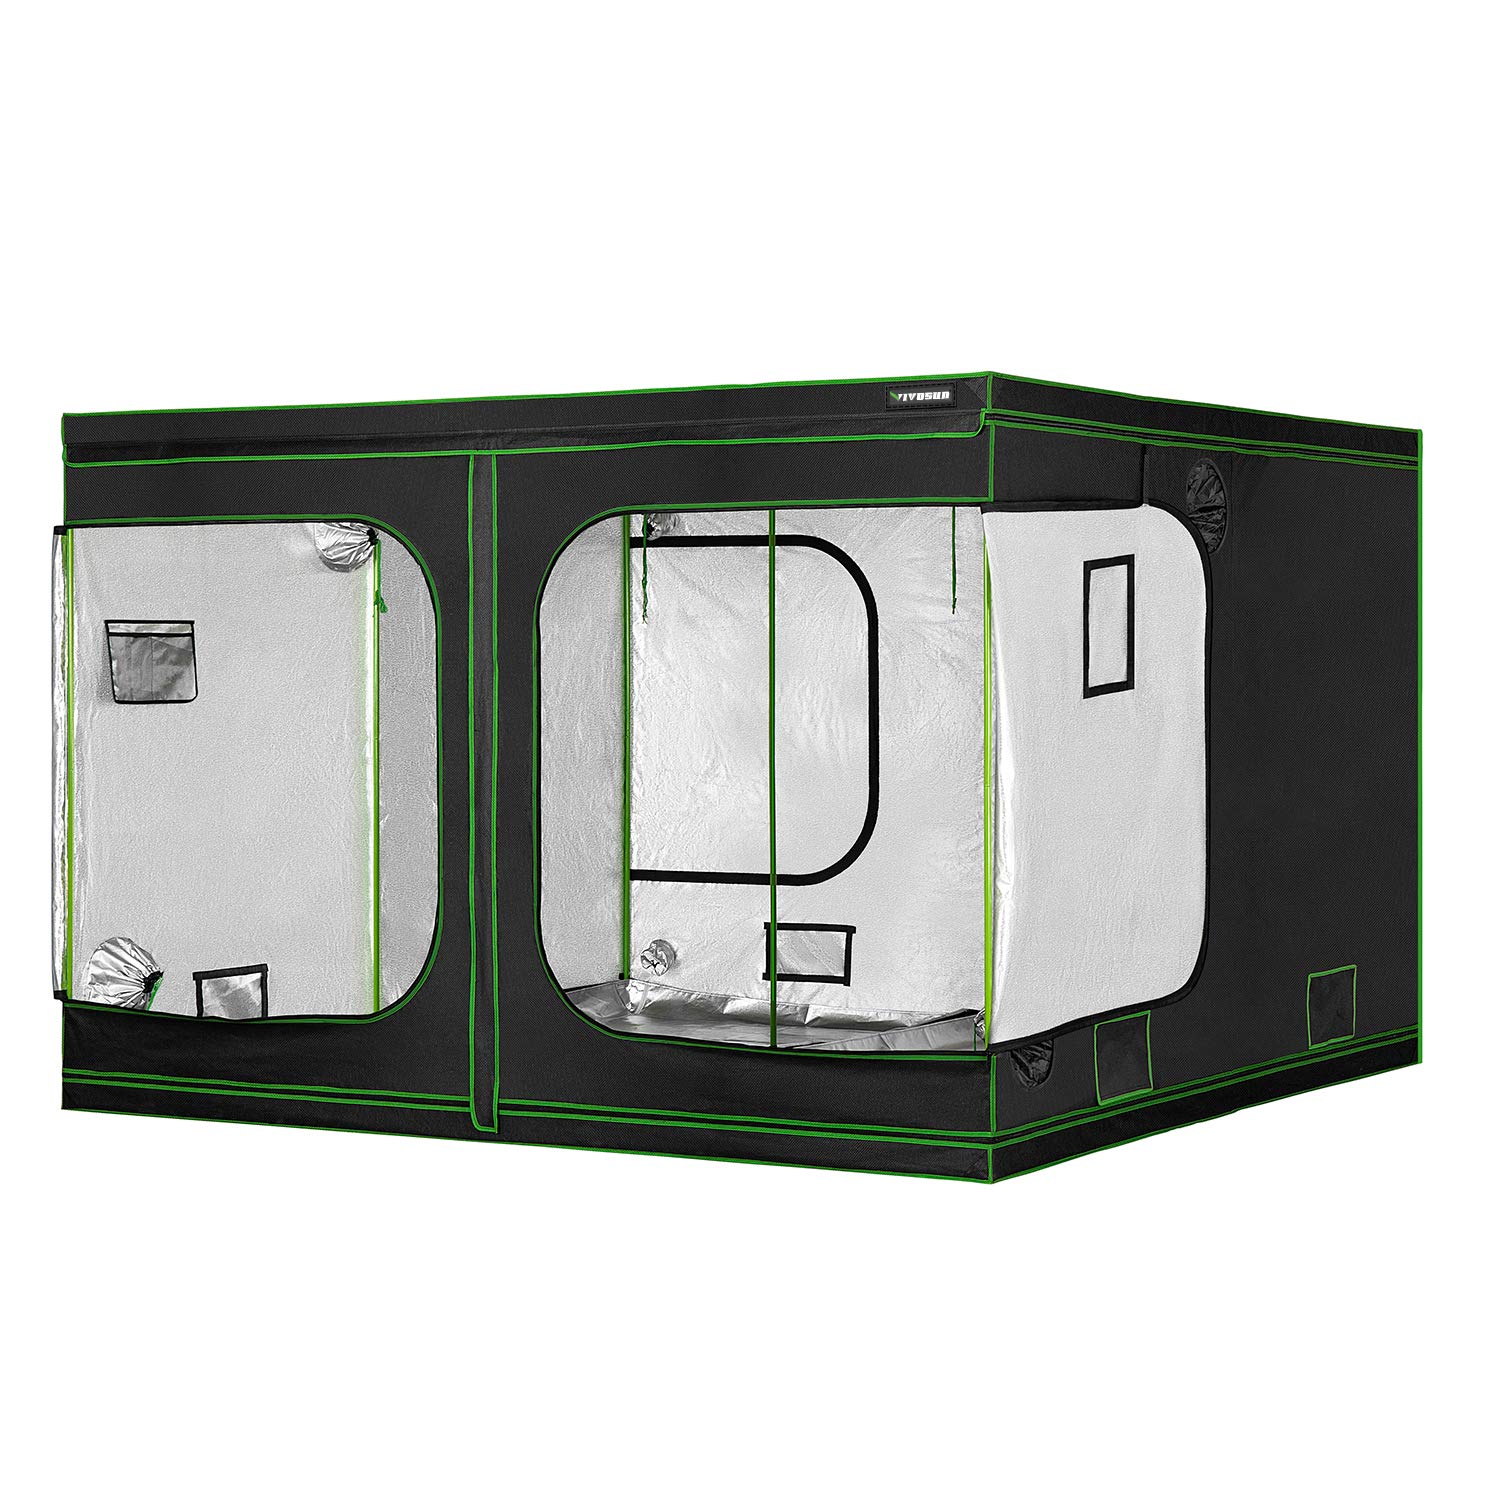 Details about   96''x48''x80'' Indoor Grow Tent Hydroponic Reflective Mylar Room Box 9'x4' ft 